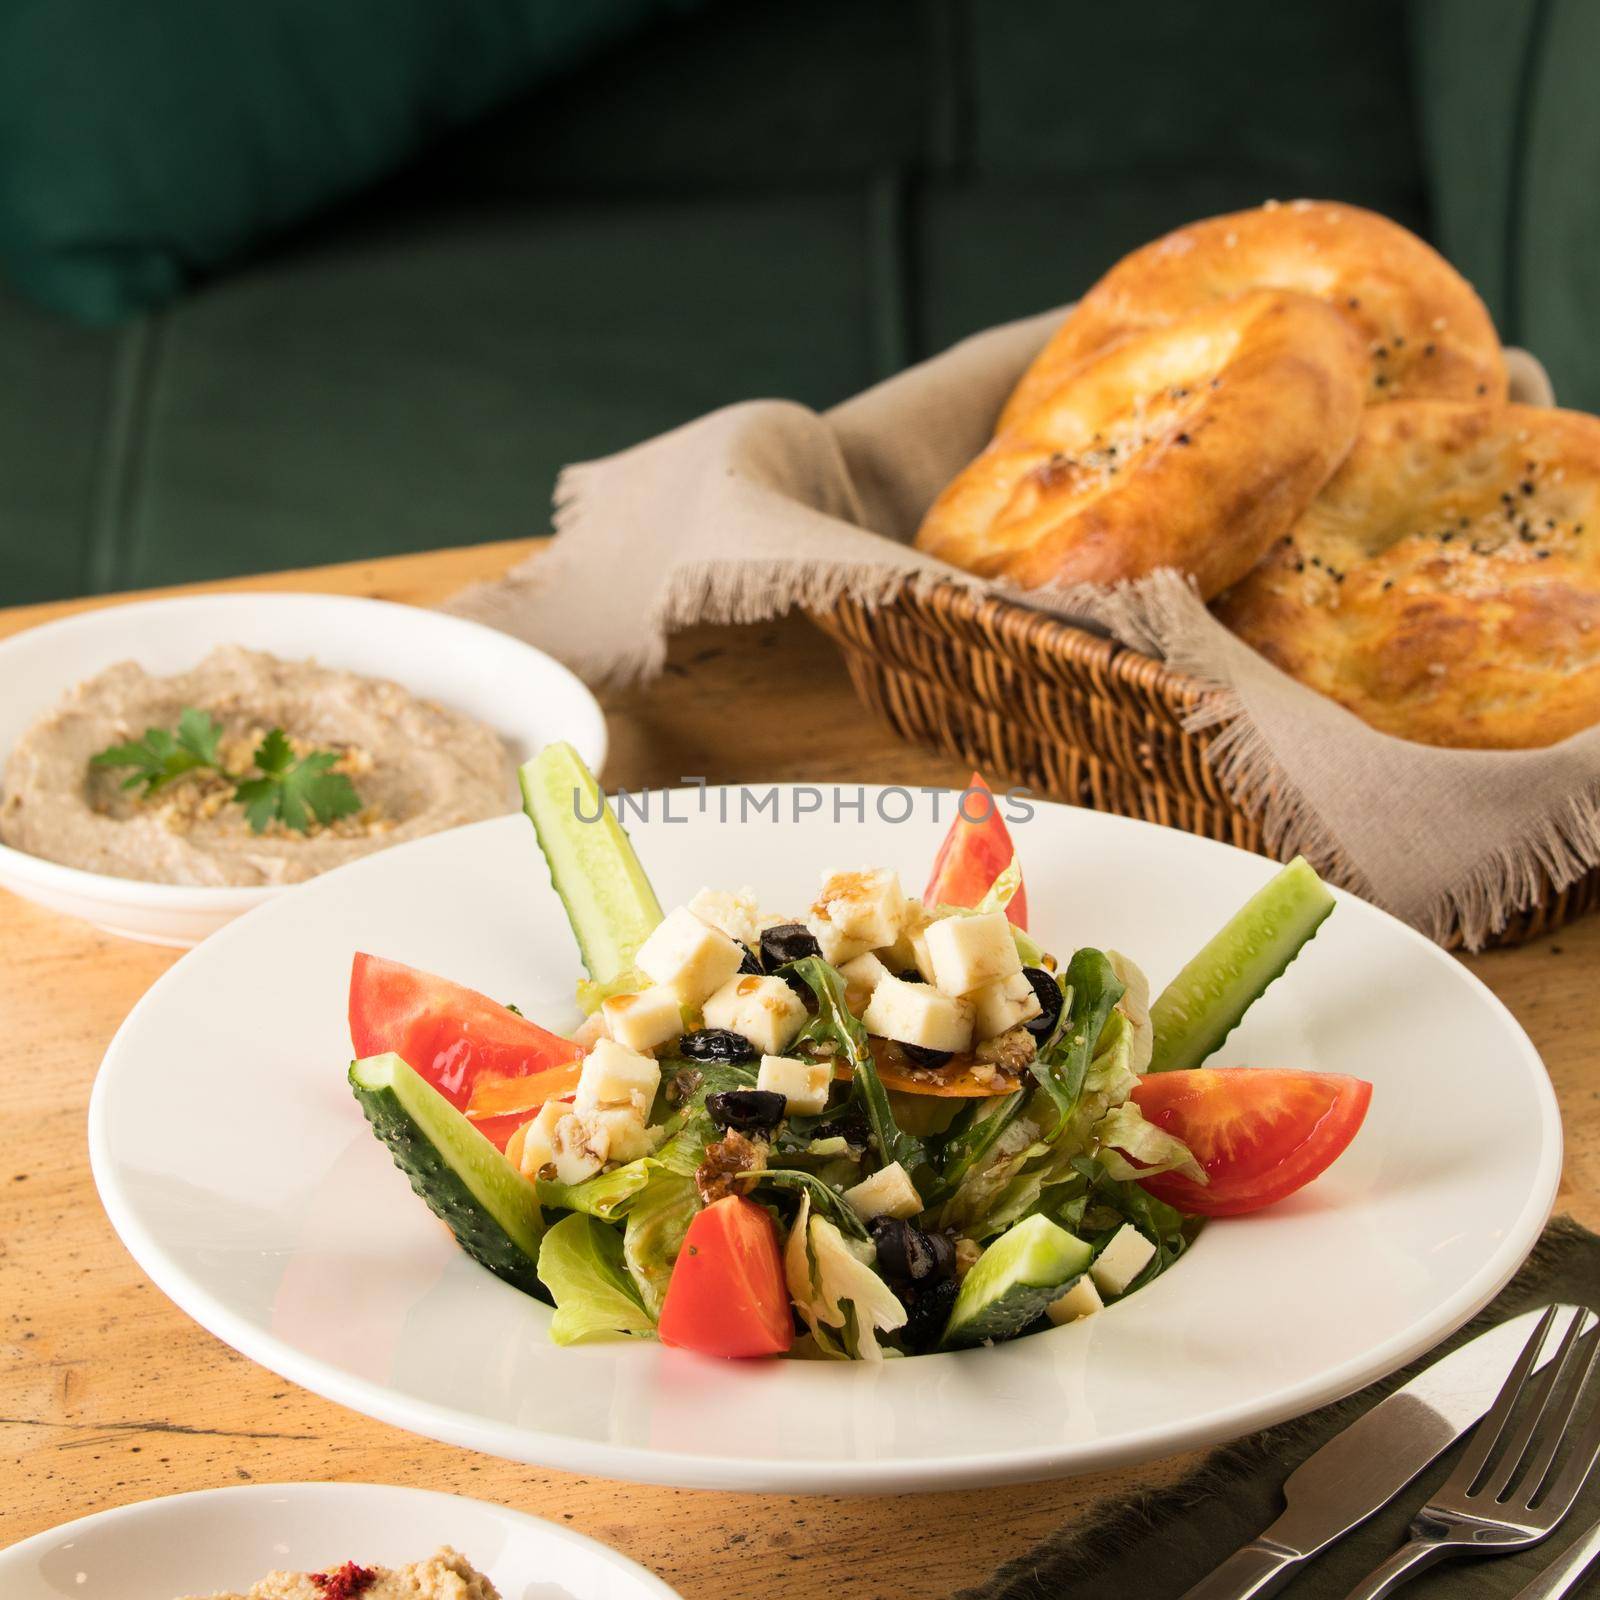 A close up shot of a salad and appetizers near basket of breads